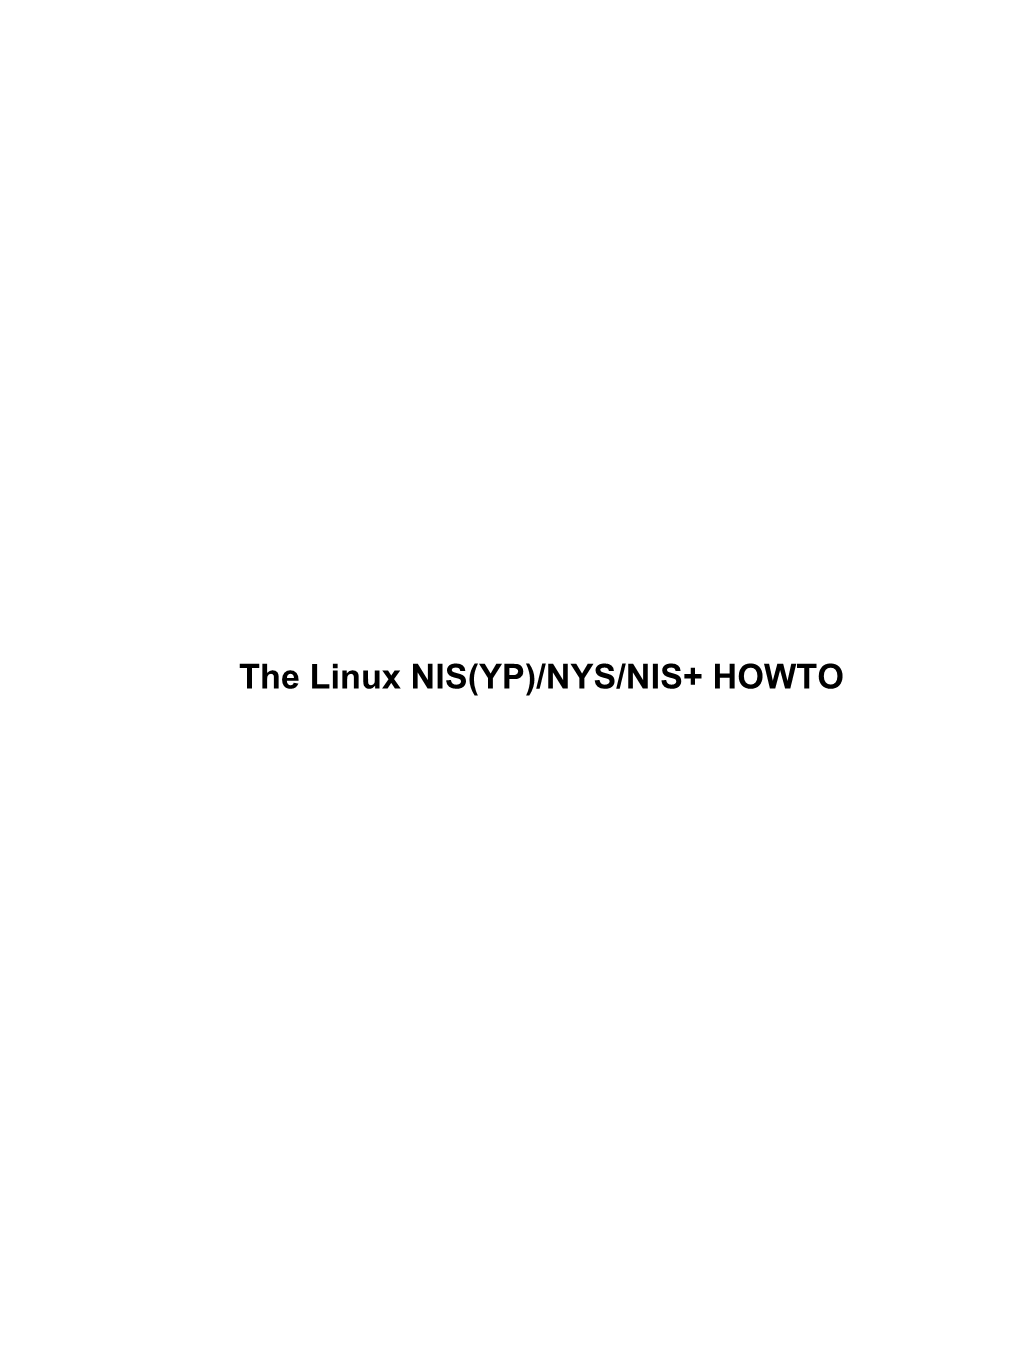 The Linux NIS(YP)/NYS/NIS+ HOWTO the Linux NIS(YP)/NYS/NIS+ HOWTO